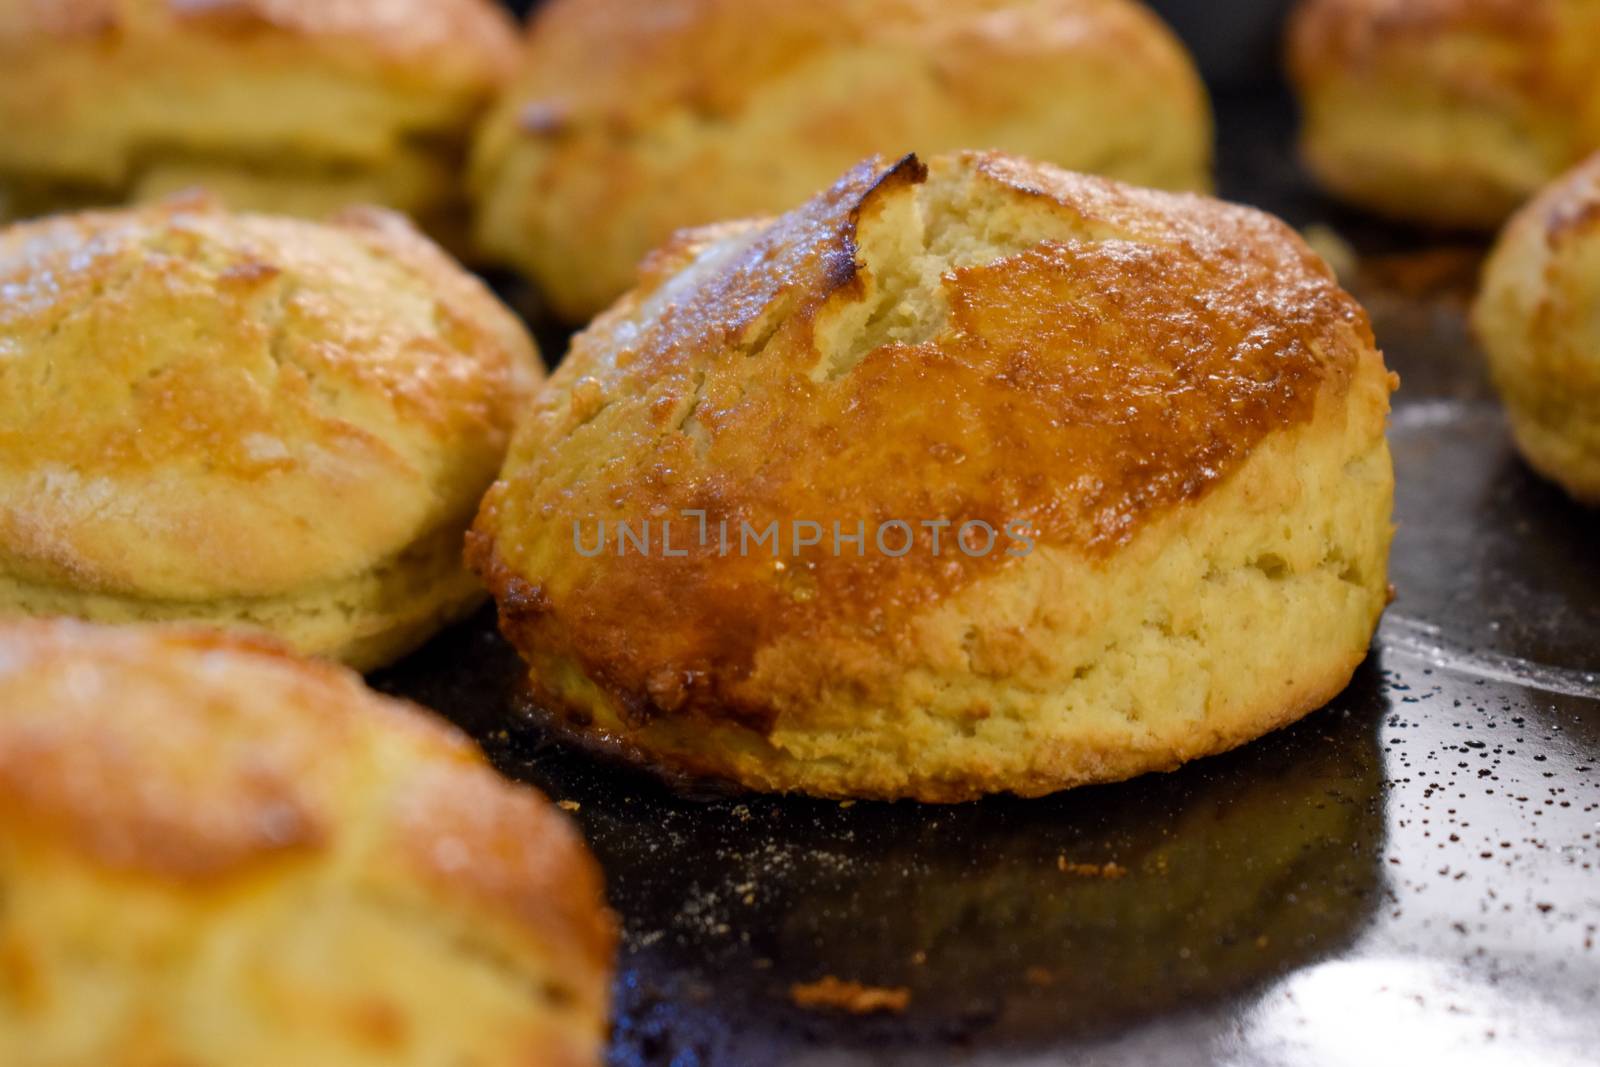 A close up of home made baked scones by benentaylor